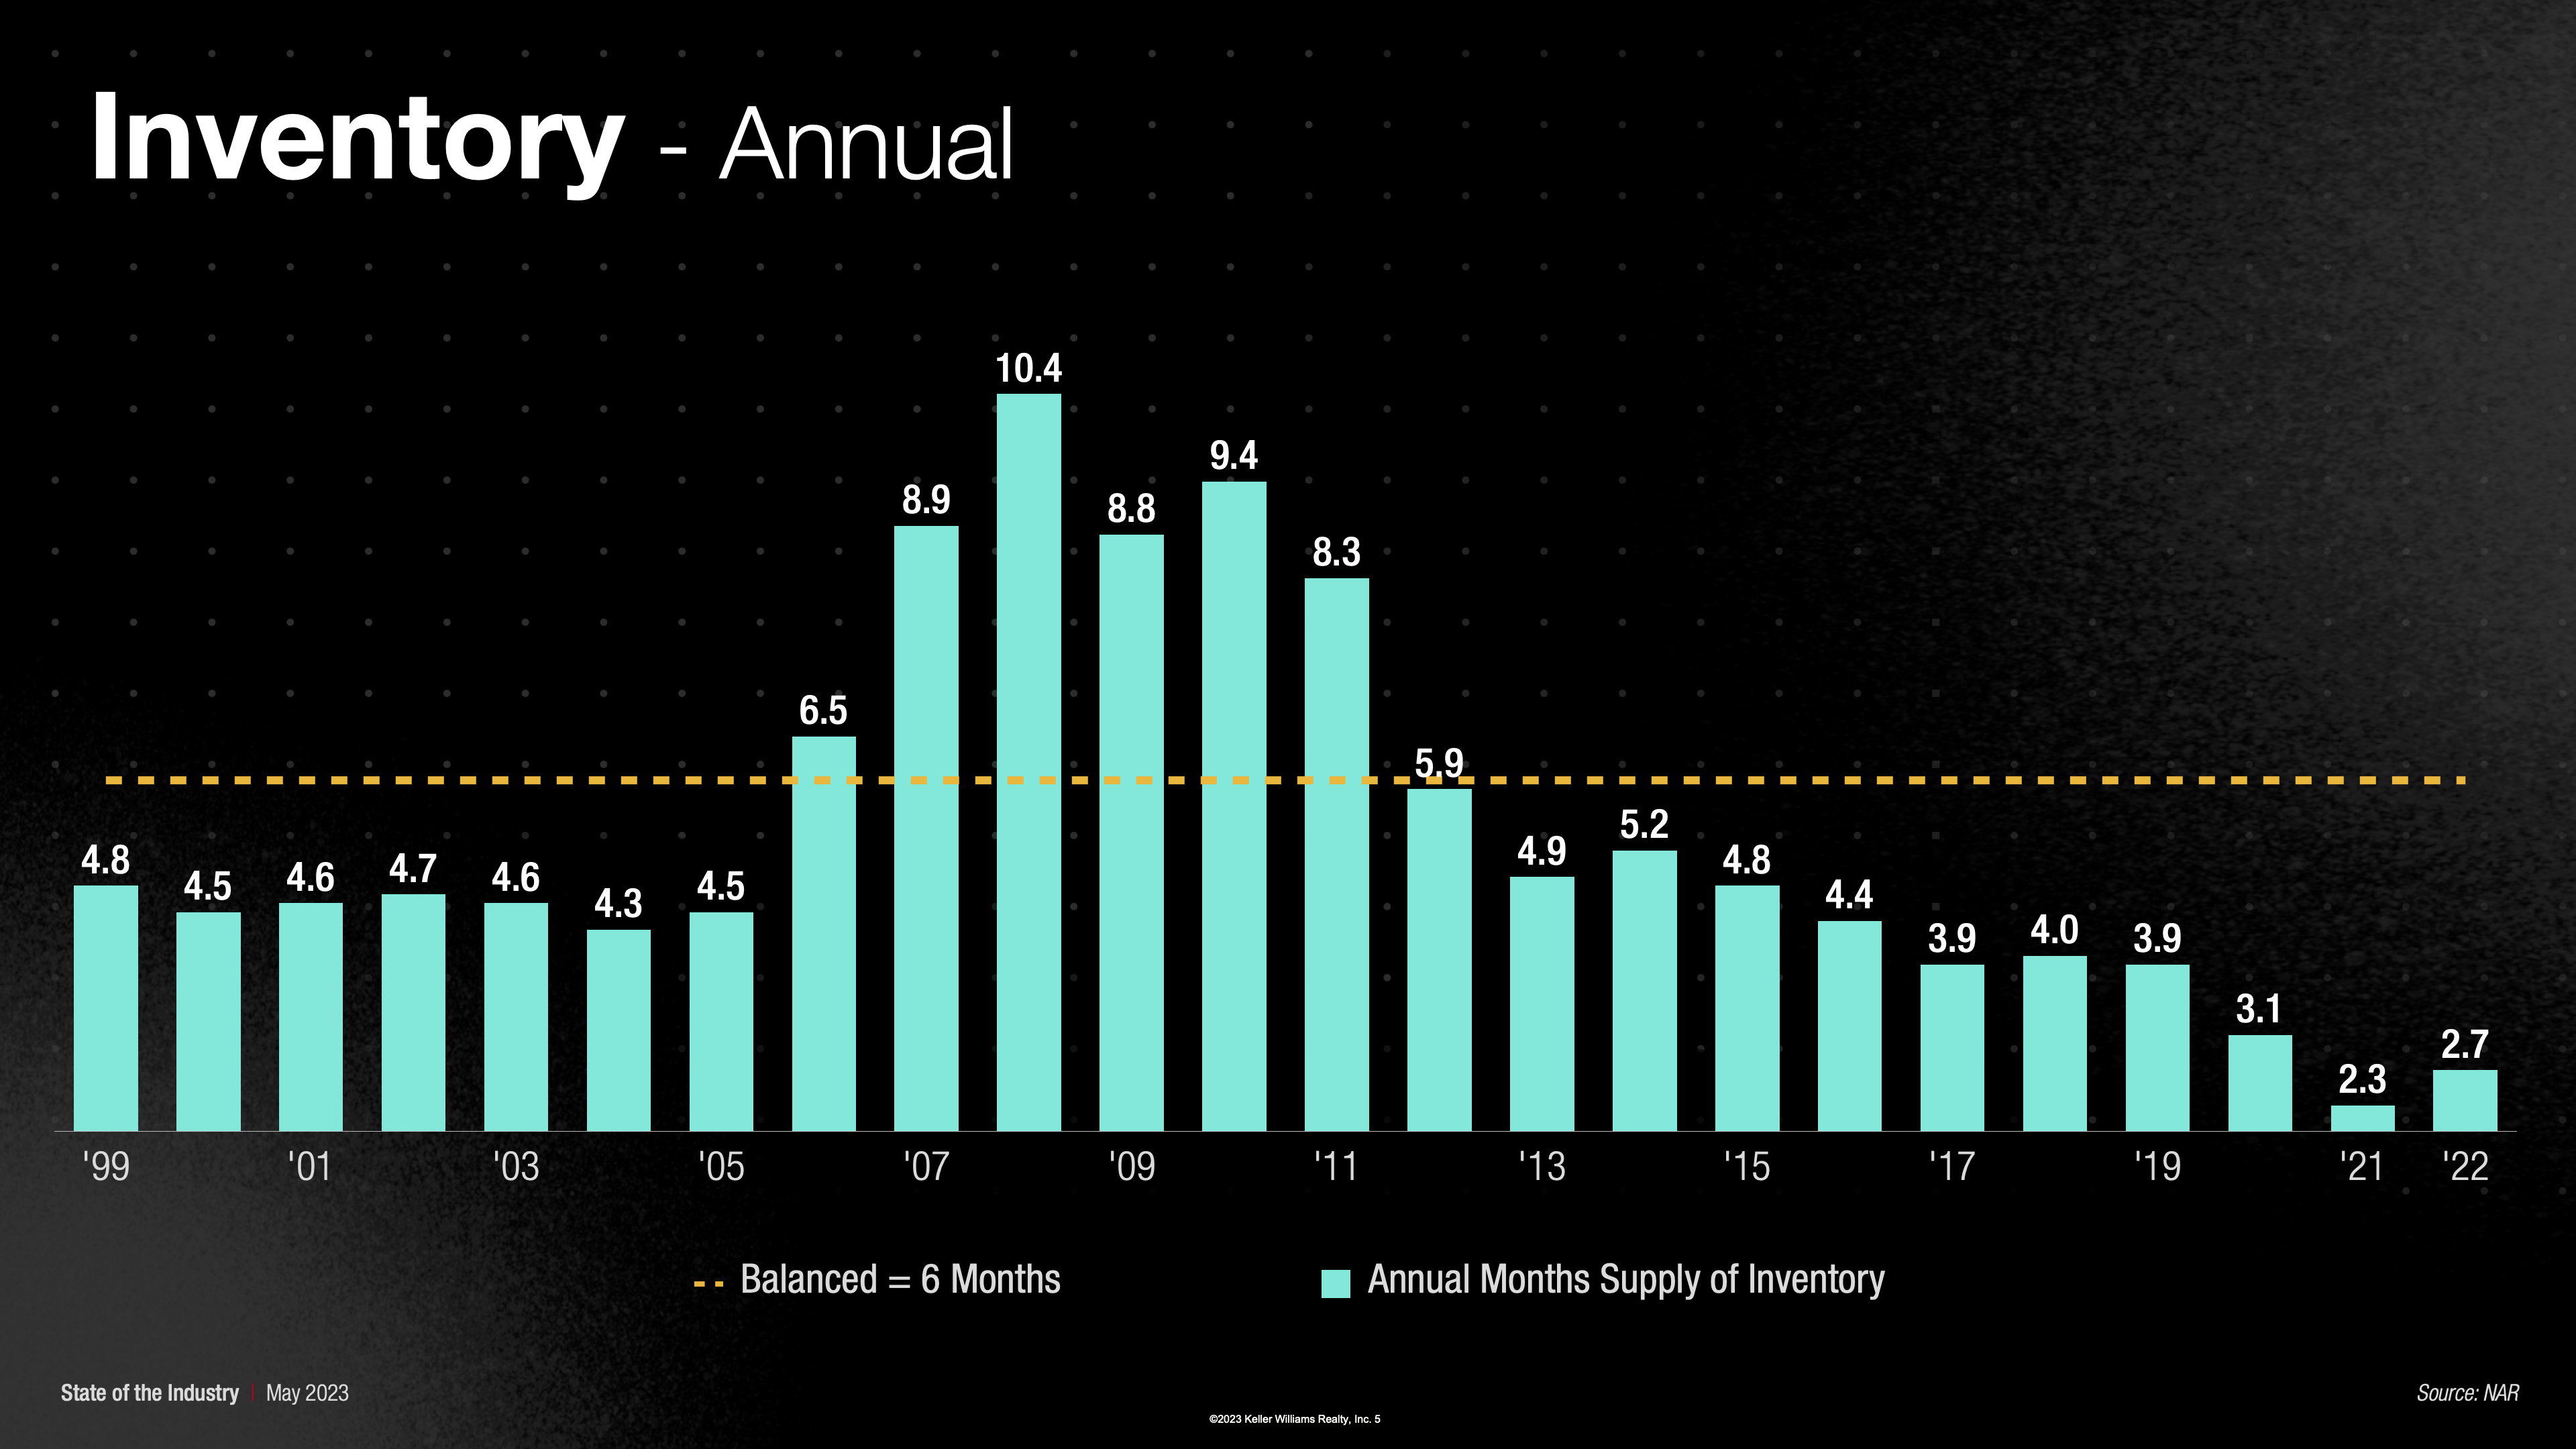 Annual Months Supply of Inventory 1999-2022